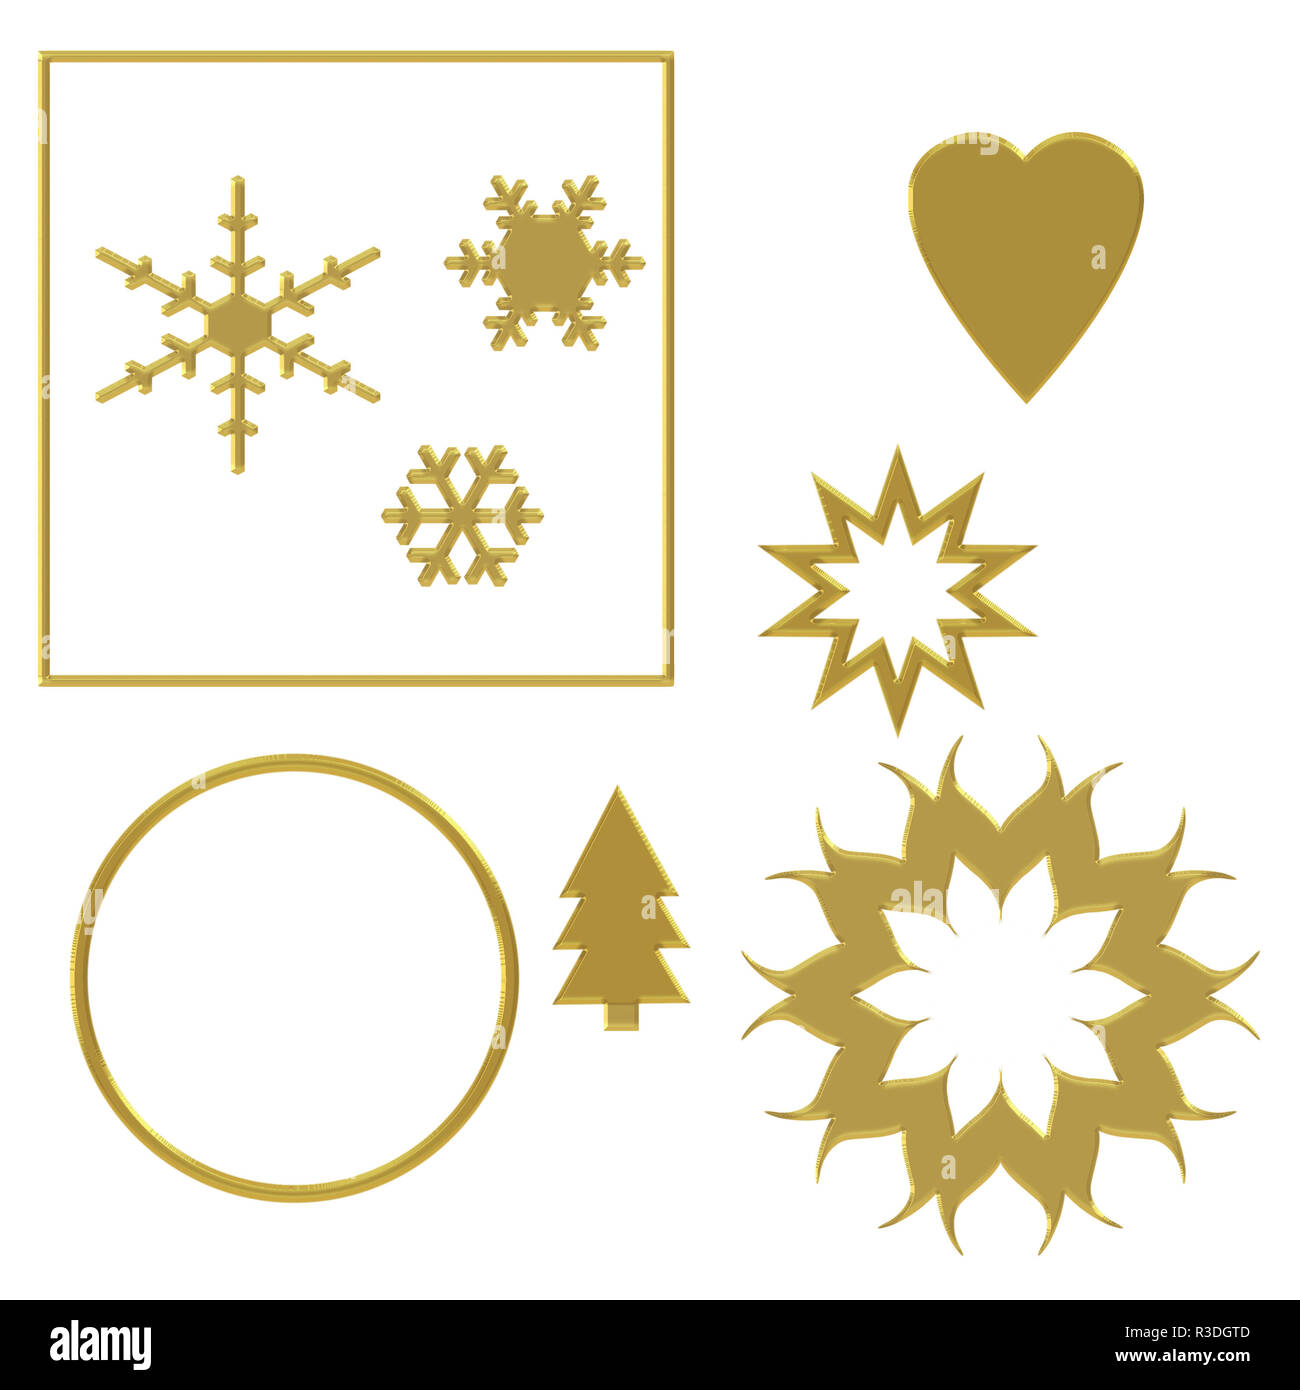 Assorted festive elements with gold effect, isolated on white background with chiselled effect fancy edge. Heart, circle, snowflake, star, Christmas tree etc. Stock Photo